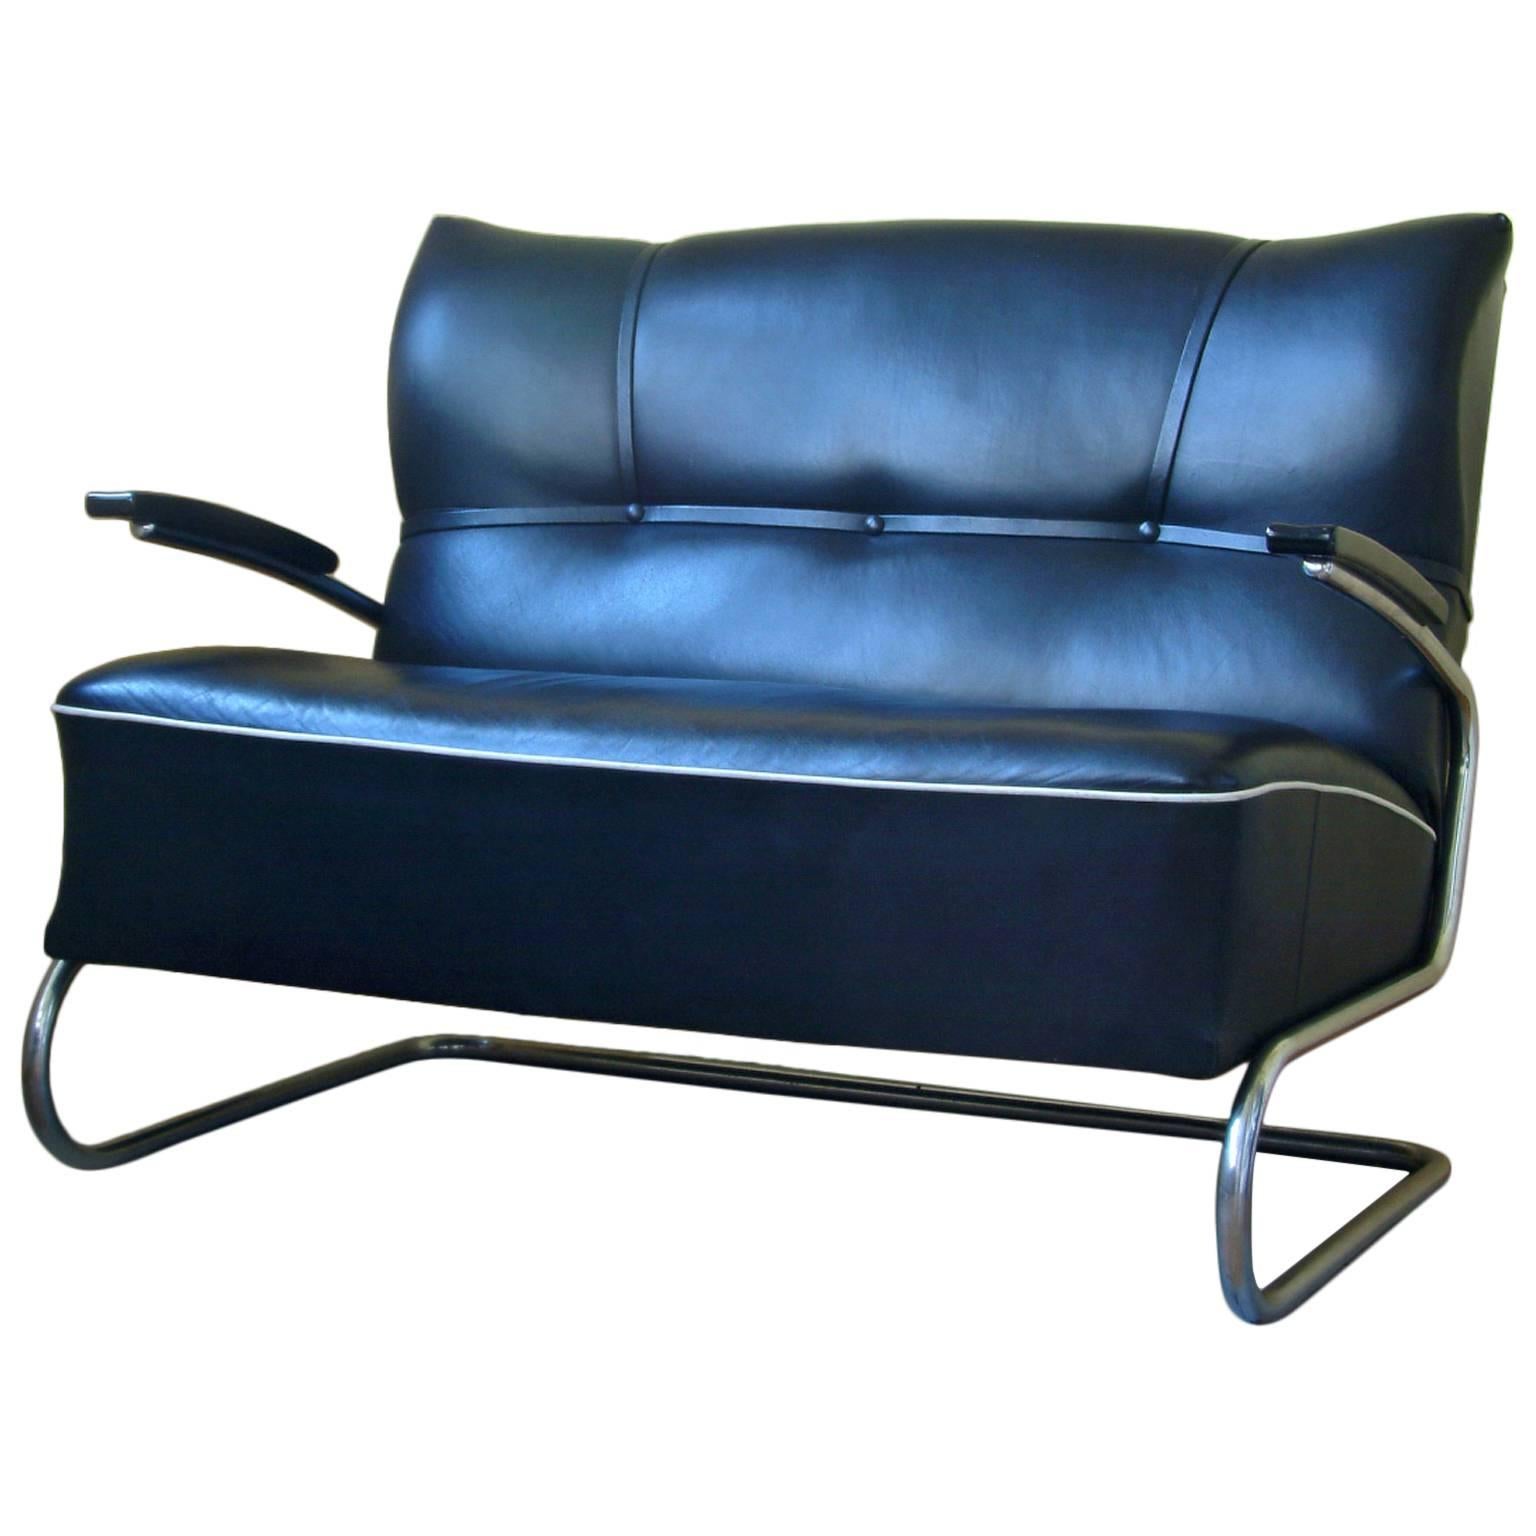 Two-Seat Tubular Steel Cantilever Couch, German Modernism, circa 1940